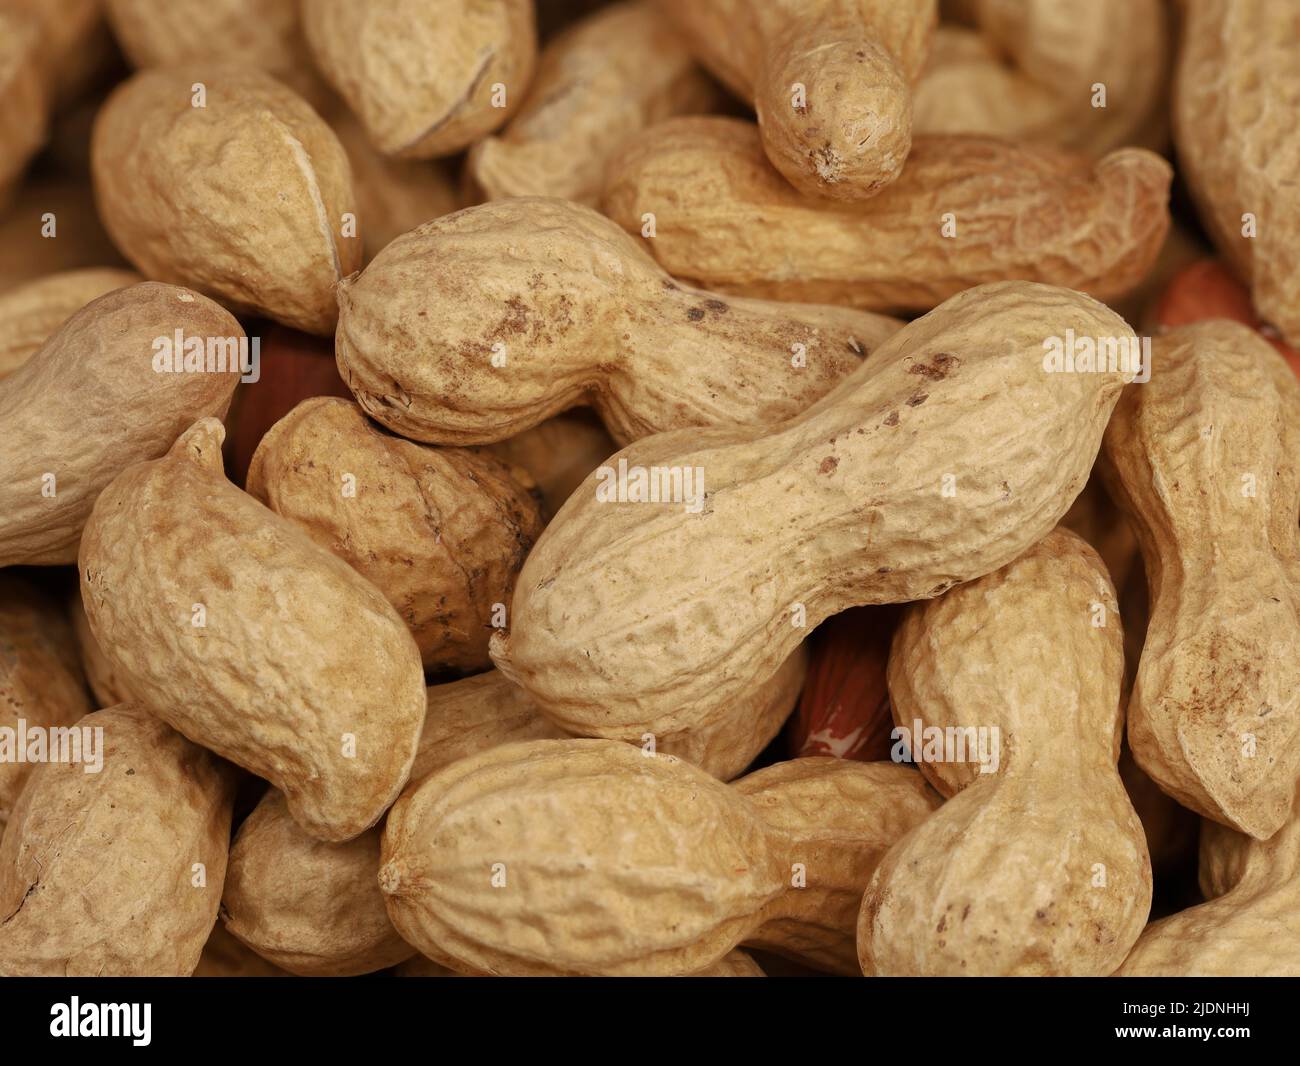 close up of peanuts with shell, dry roasted and unshelled nuts as healthy snack Stock Photo